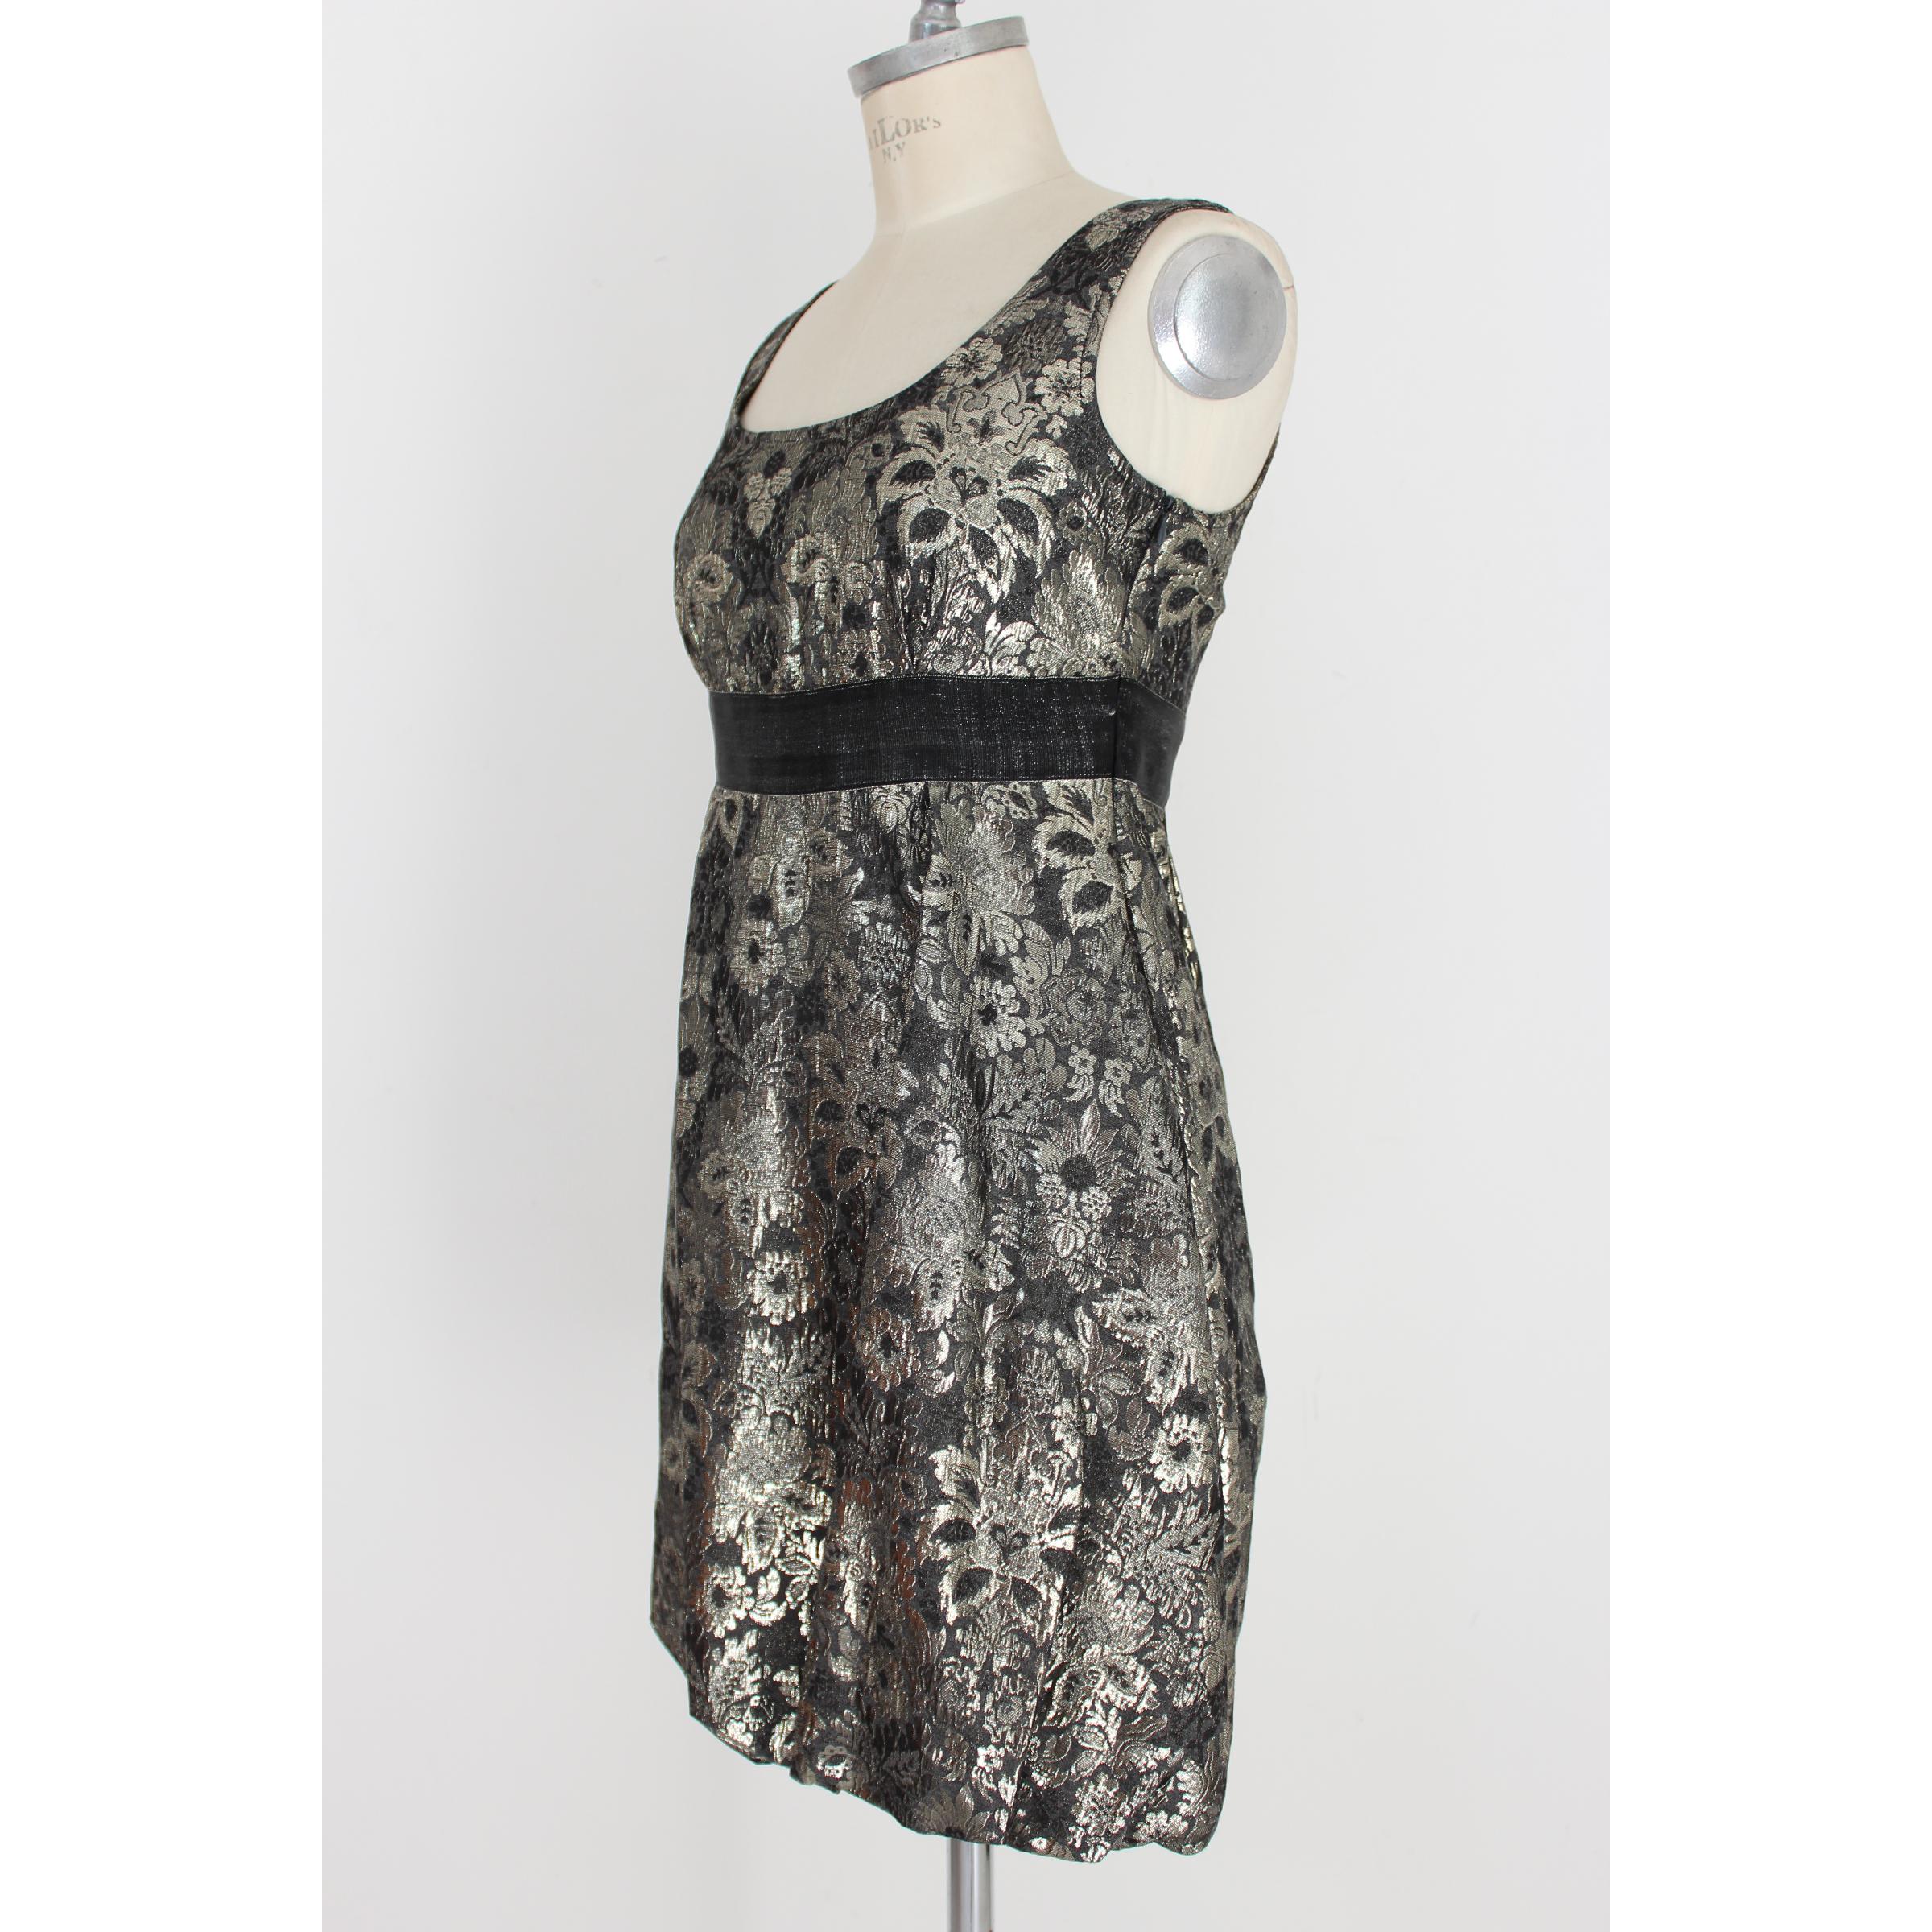 Moschino Black Lame Floral Evening Sheath Dress 1990s For Sale 1